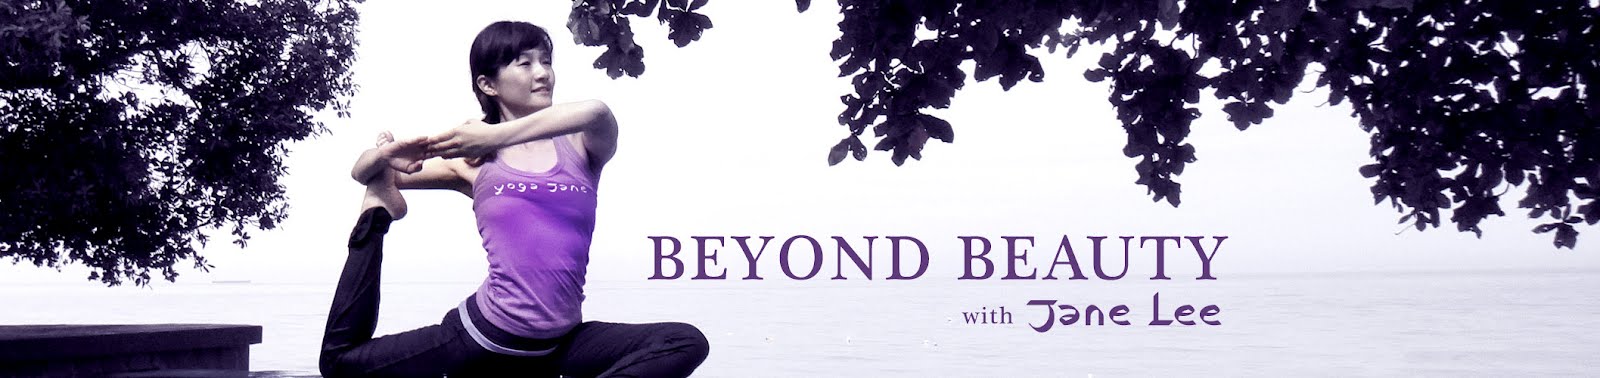 Beyond Beauty with Jane Lee